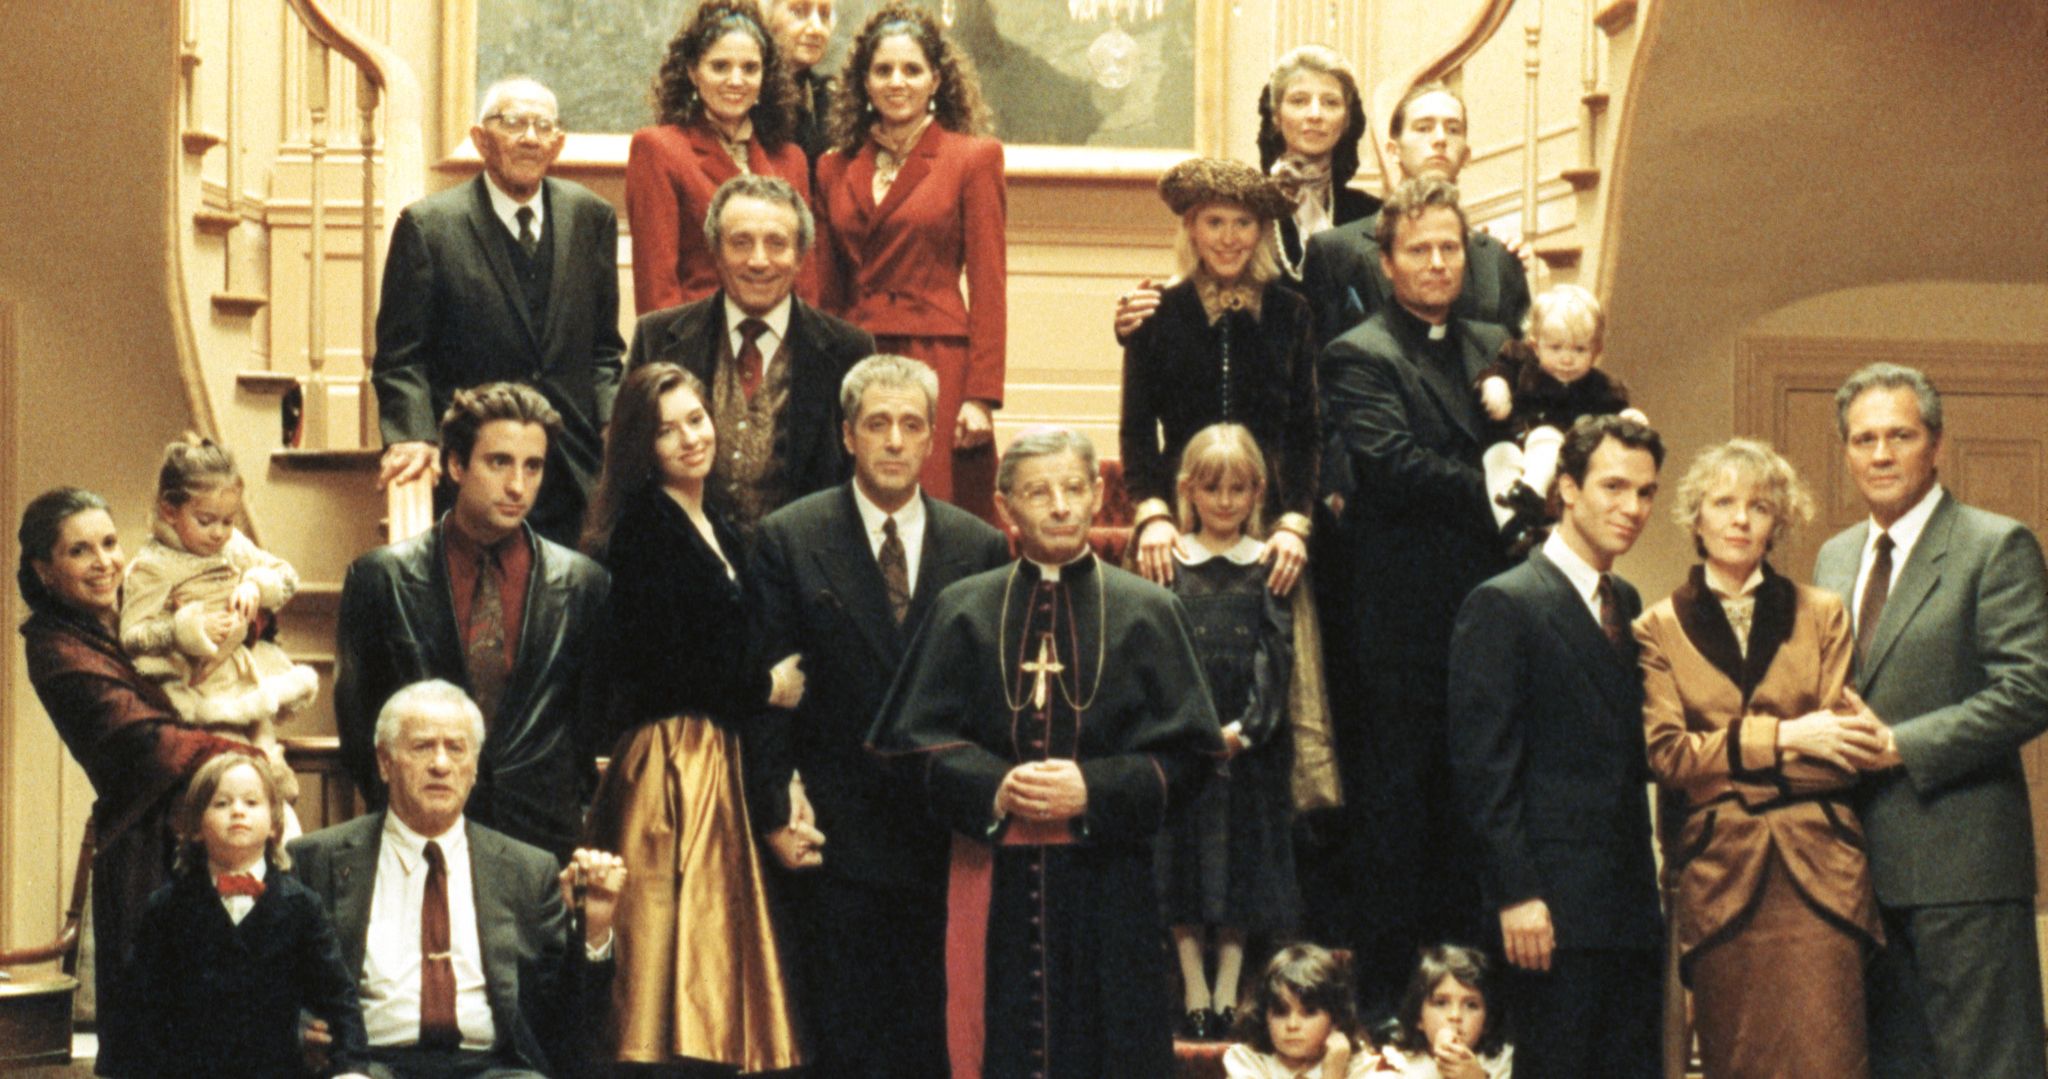 The Godfather Part III Returns to Theaters for 30th Anniversary with an All-New Cut